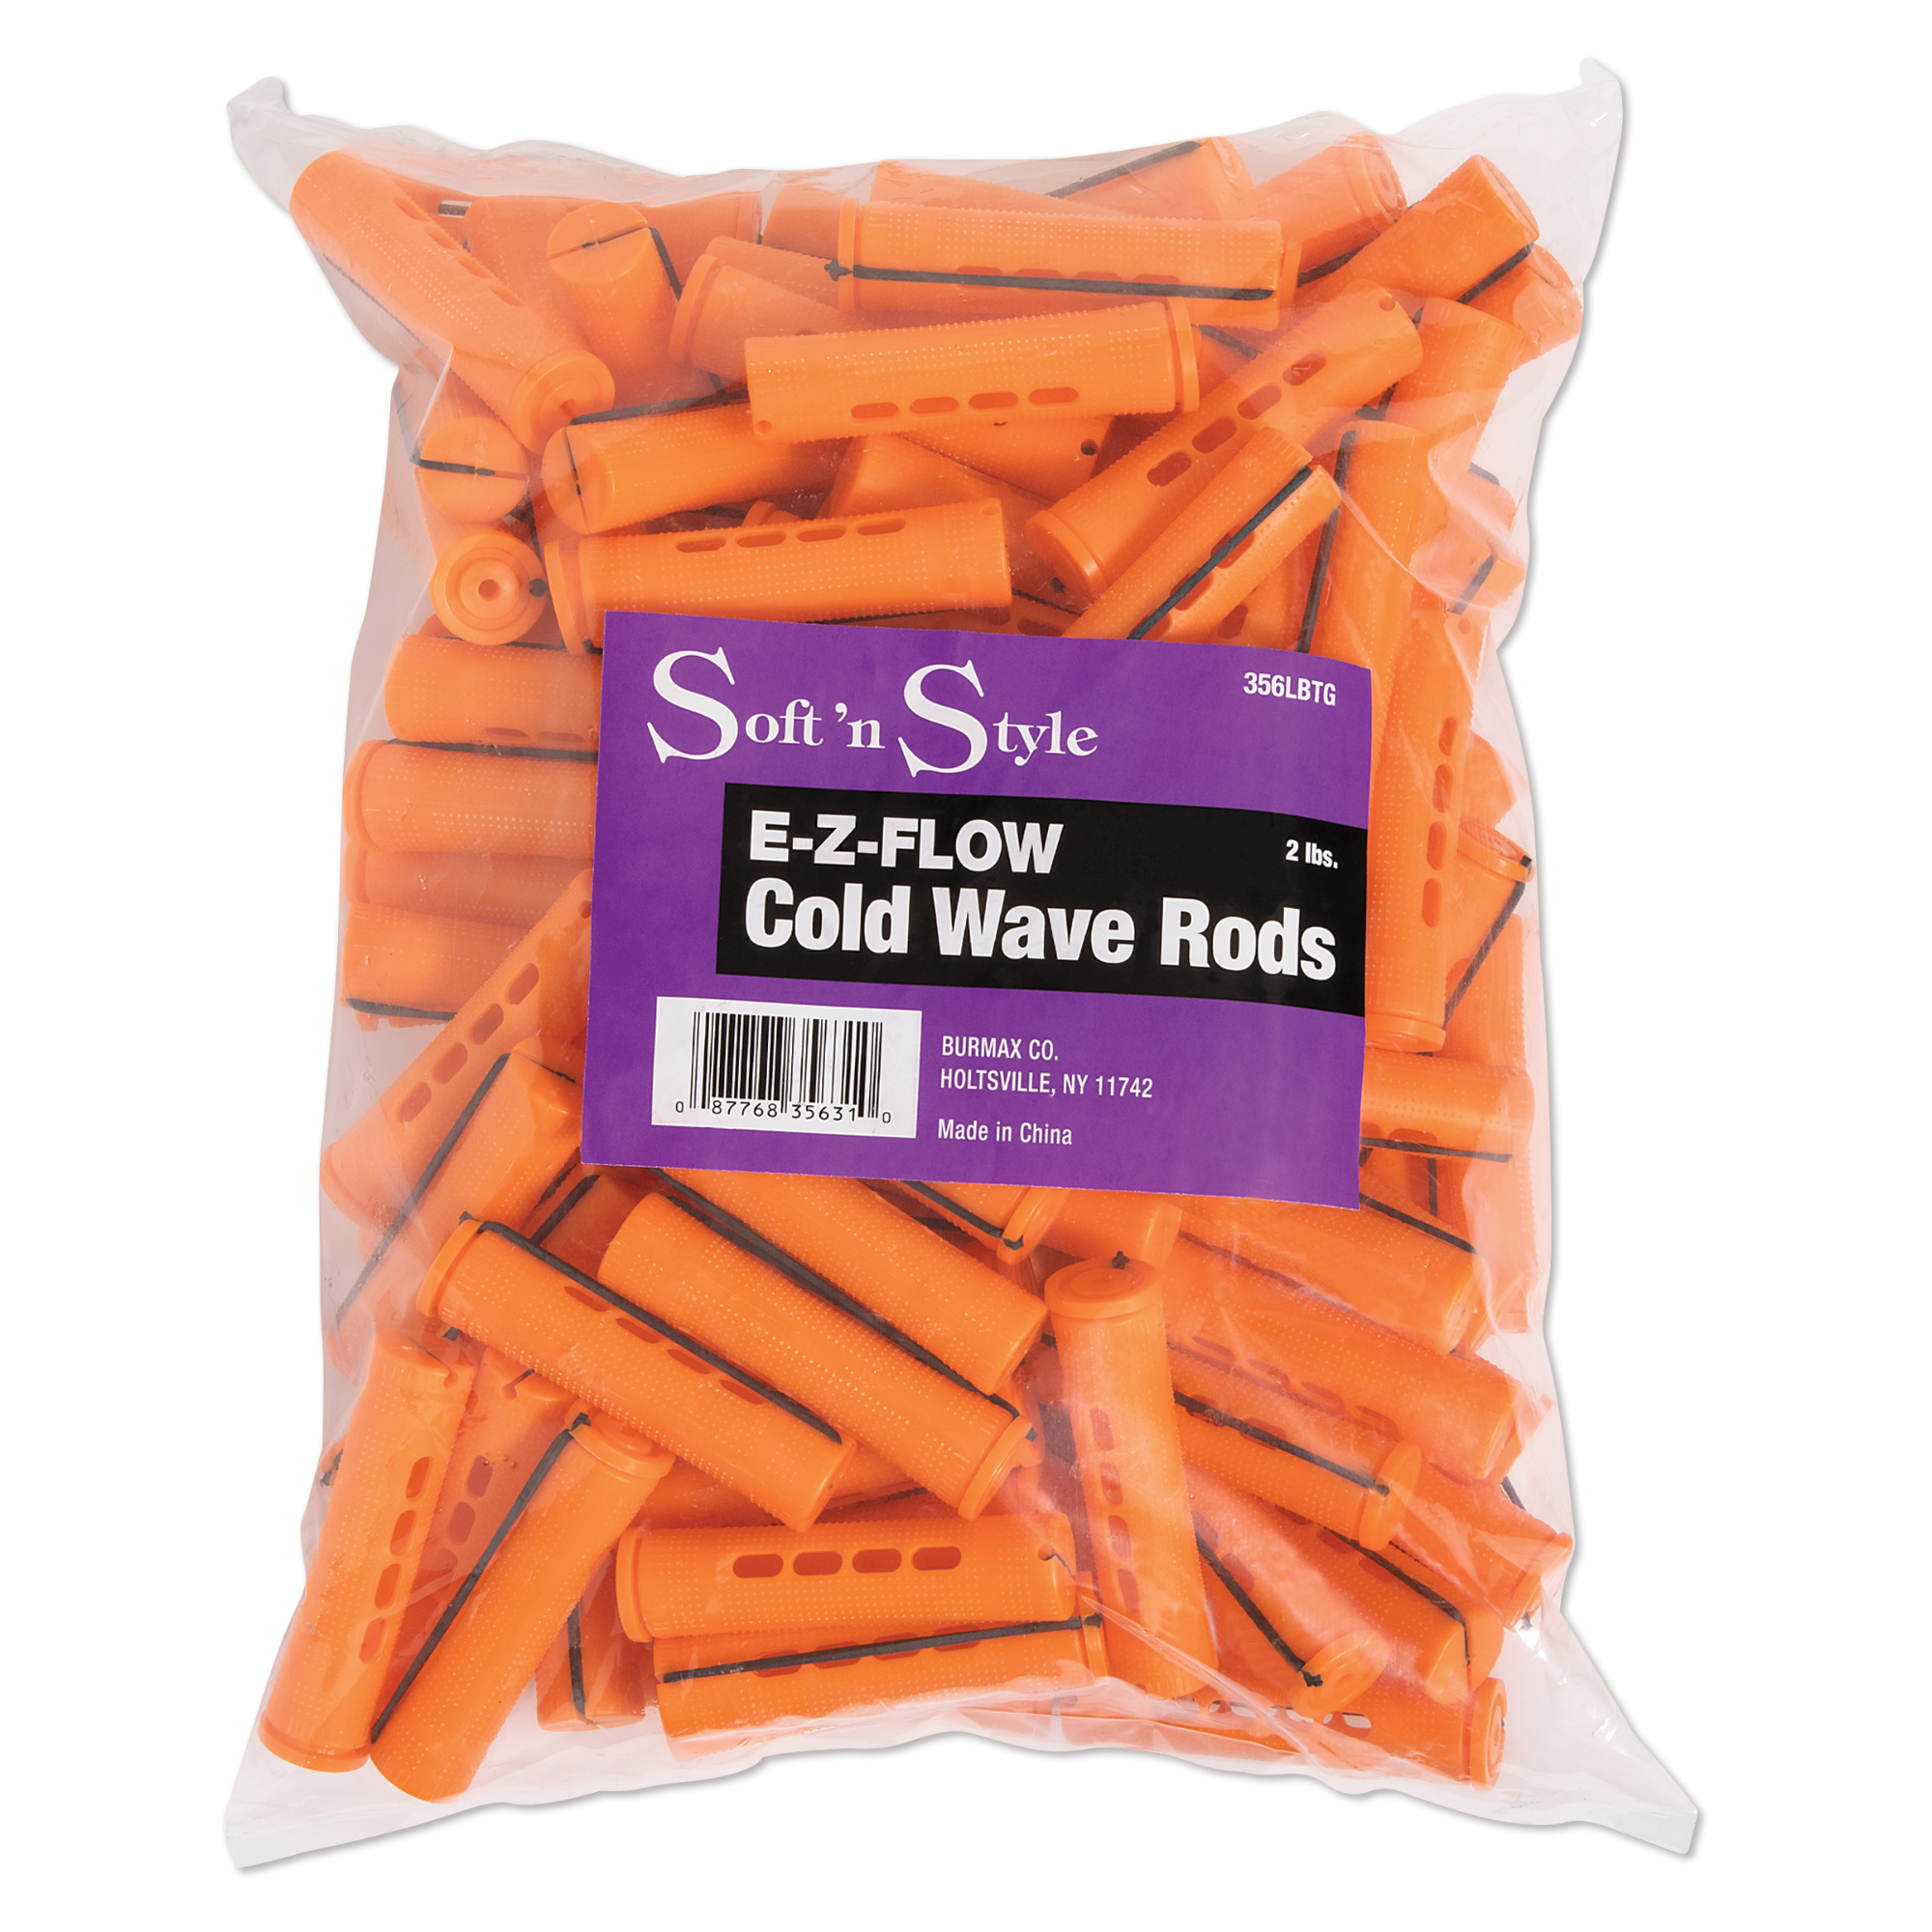 Concave Cold Wave Rods, Long Tangerine, 2 lbs.